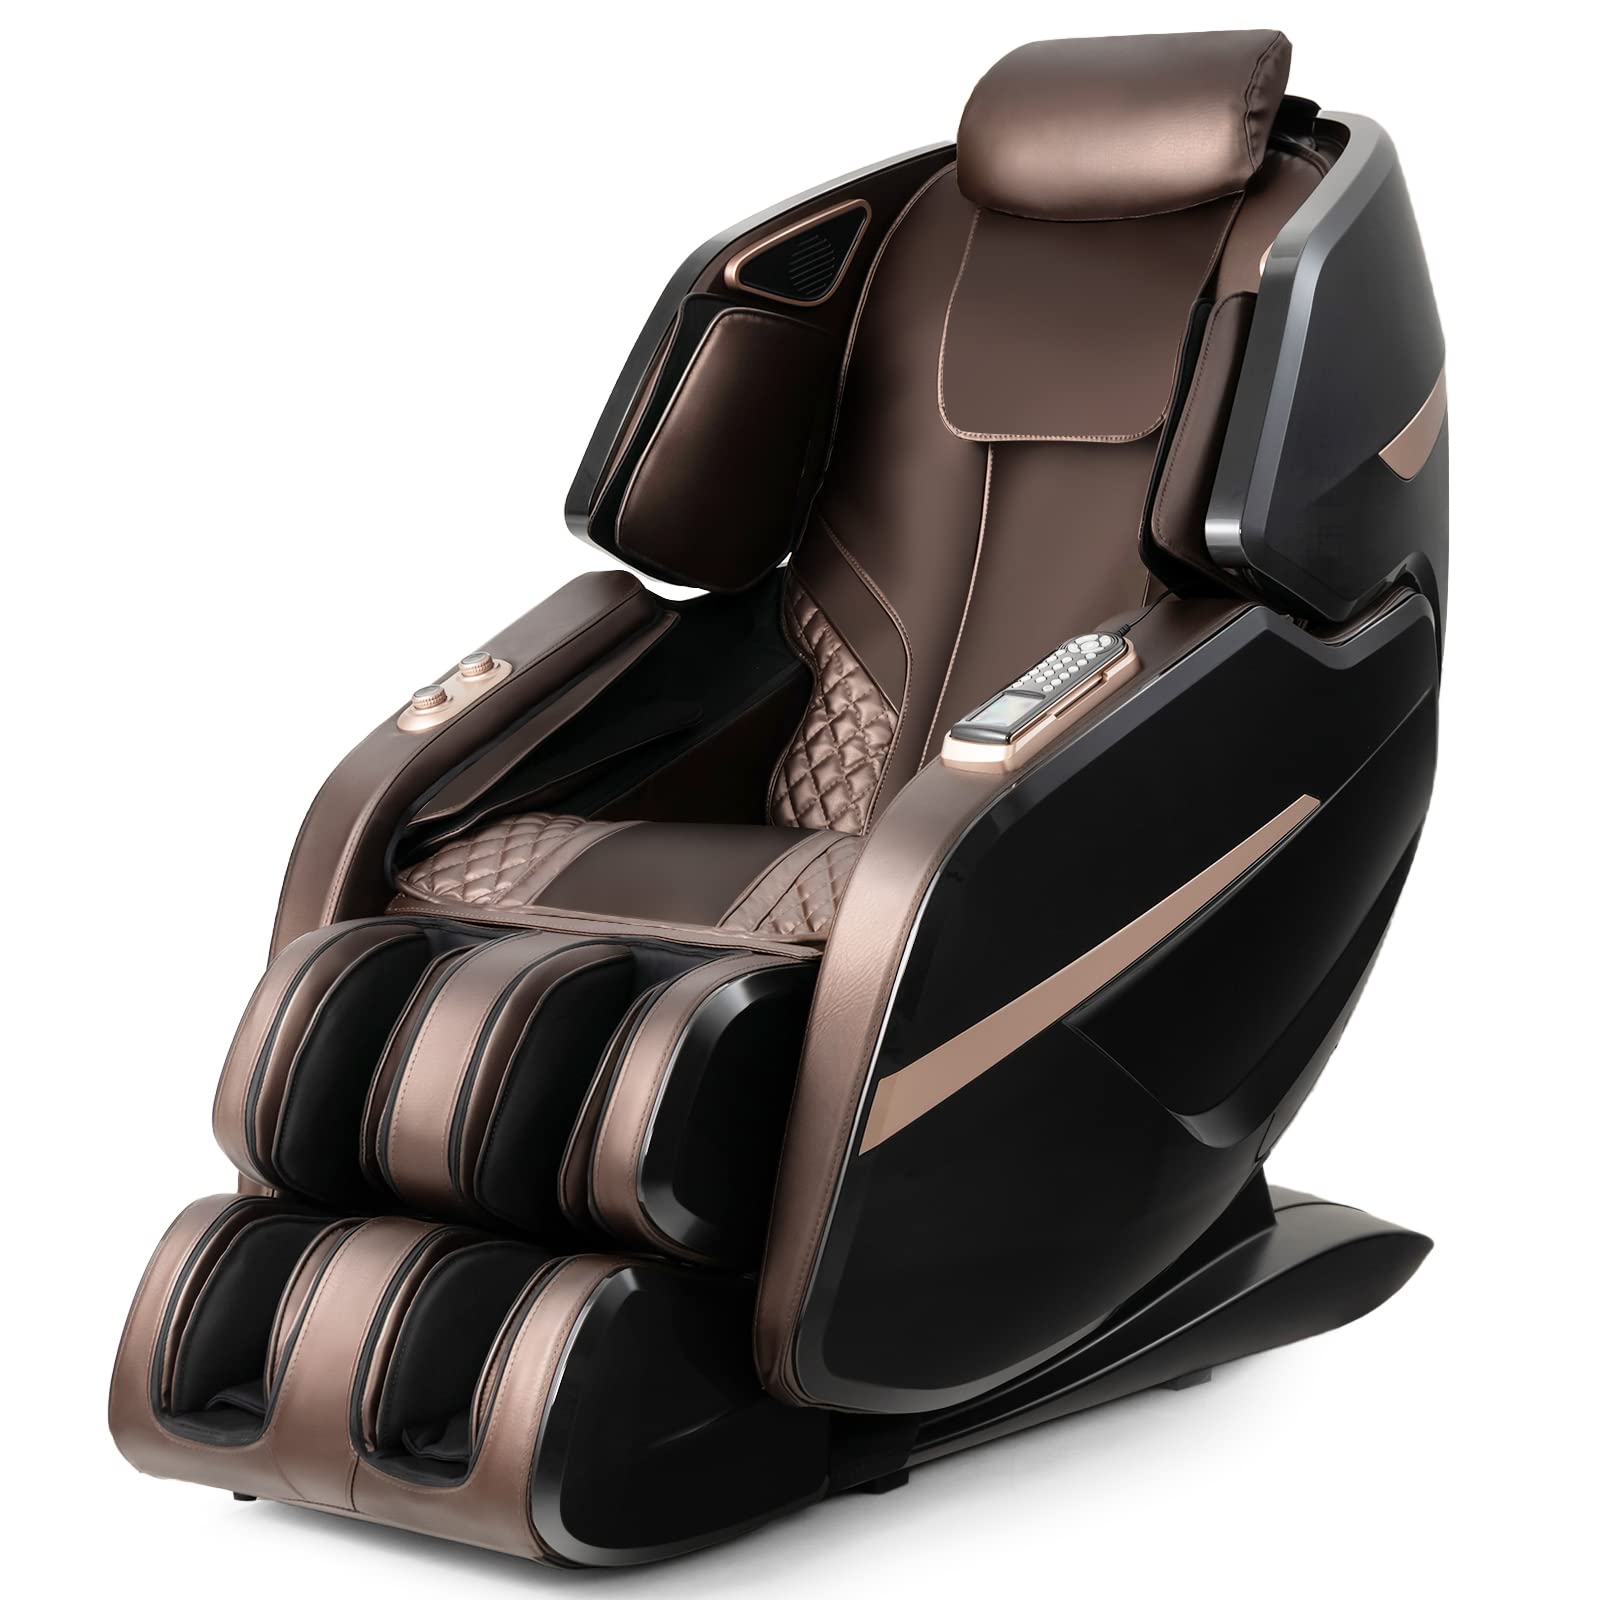 Giantex Massage Chair Full Body - 3D Massage Recliner with 55" Double SL Track, Zero Gravity Mode